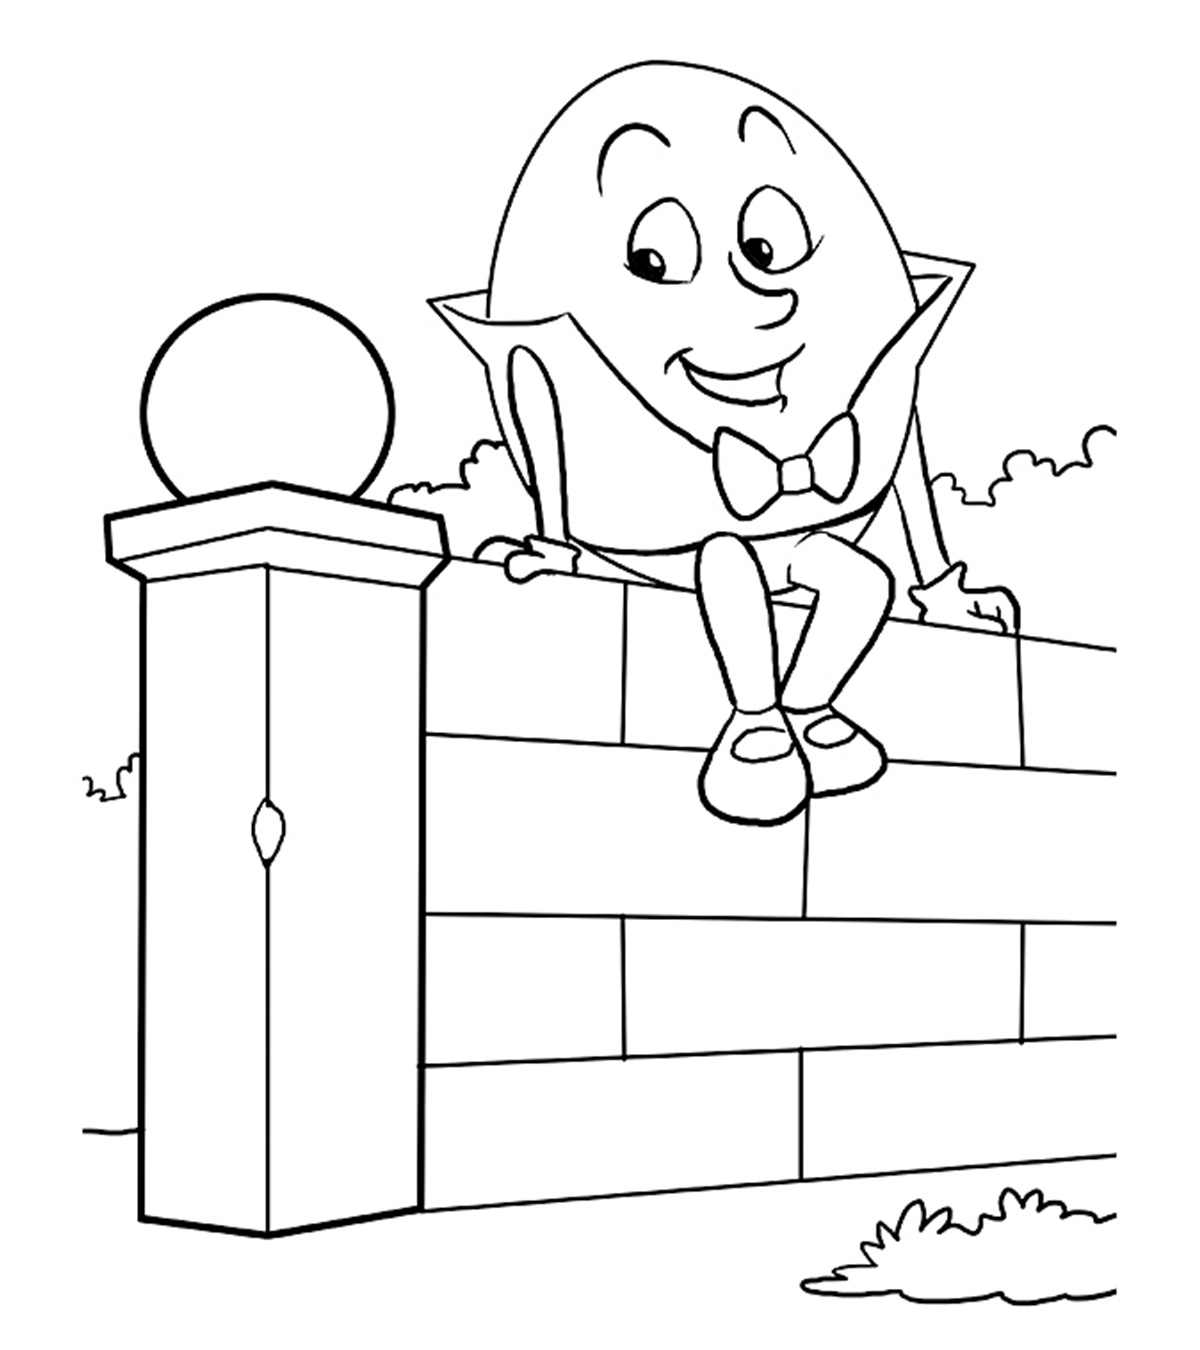 10 Adorable Humpty Dumpty Coloring Pages For Toddlers_image